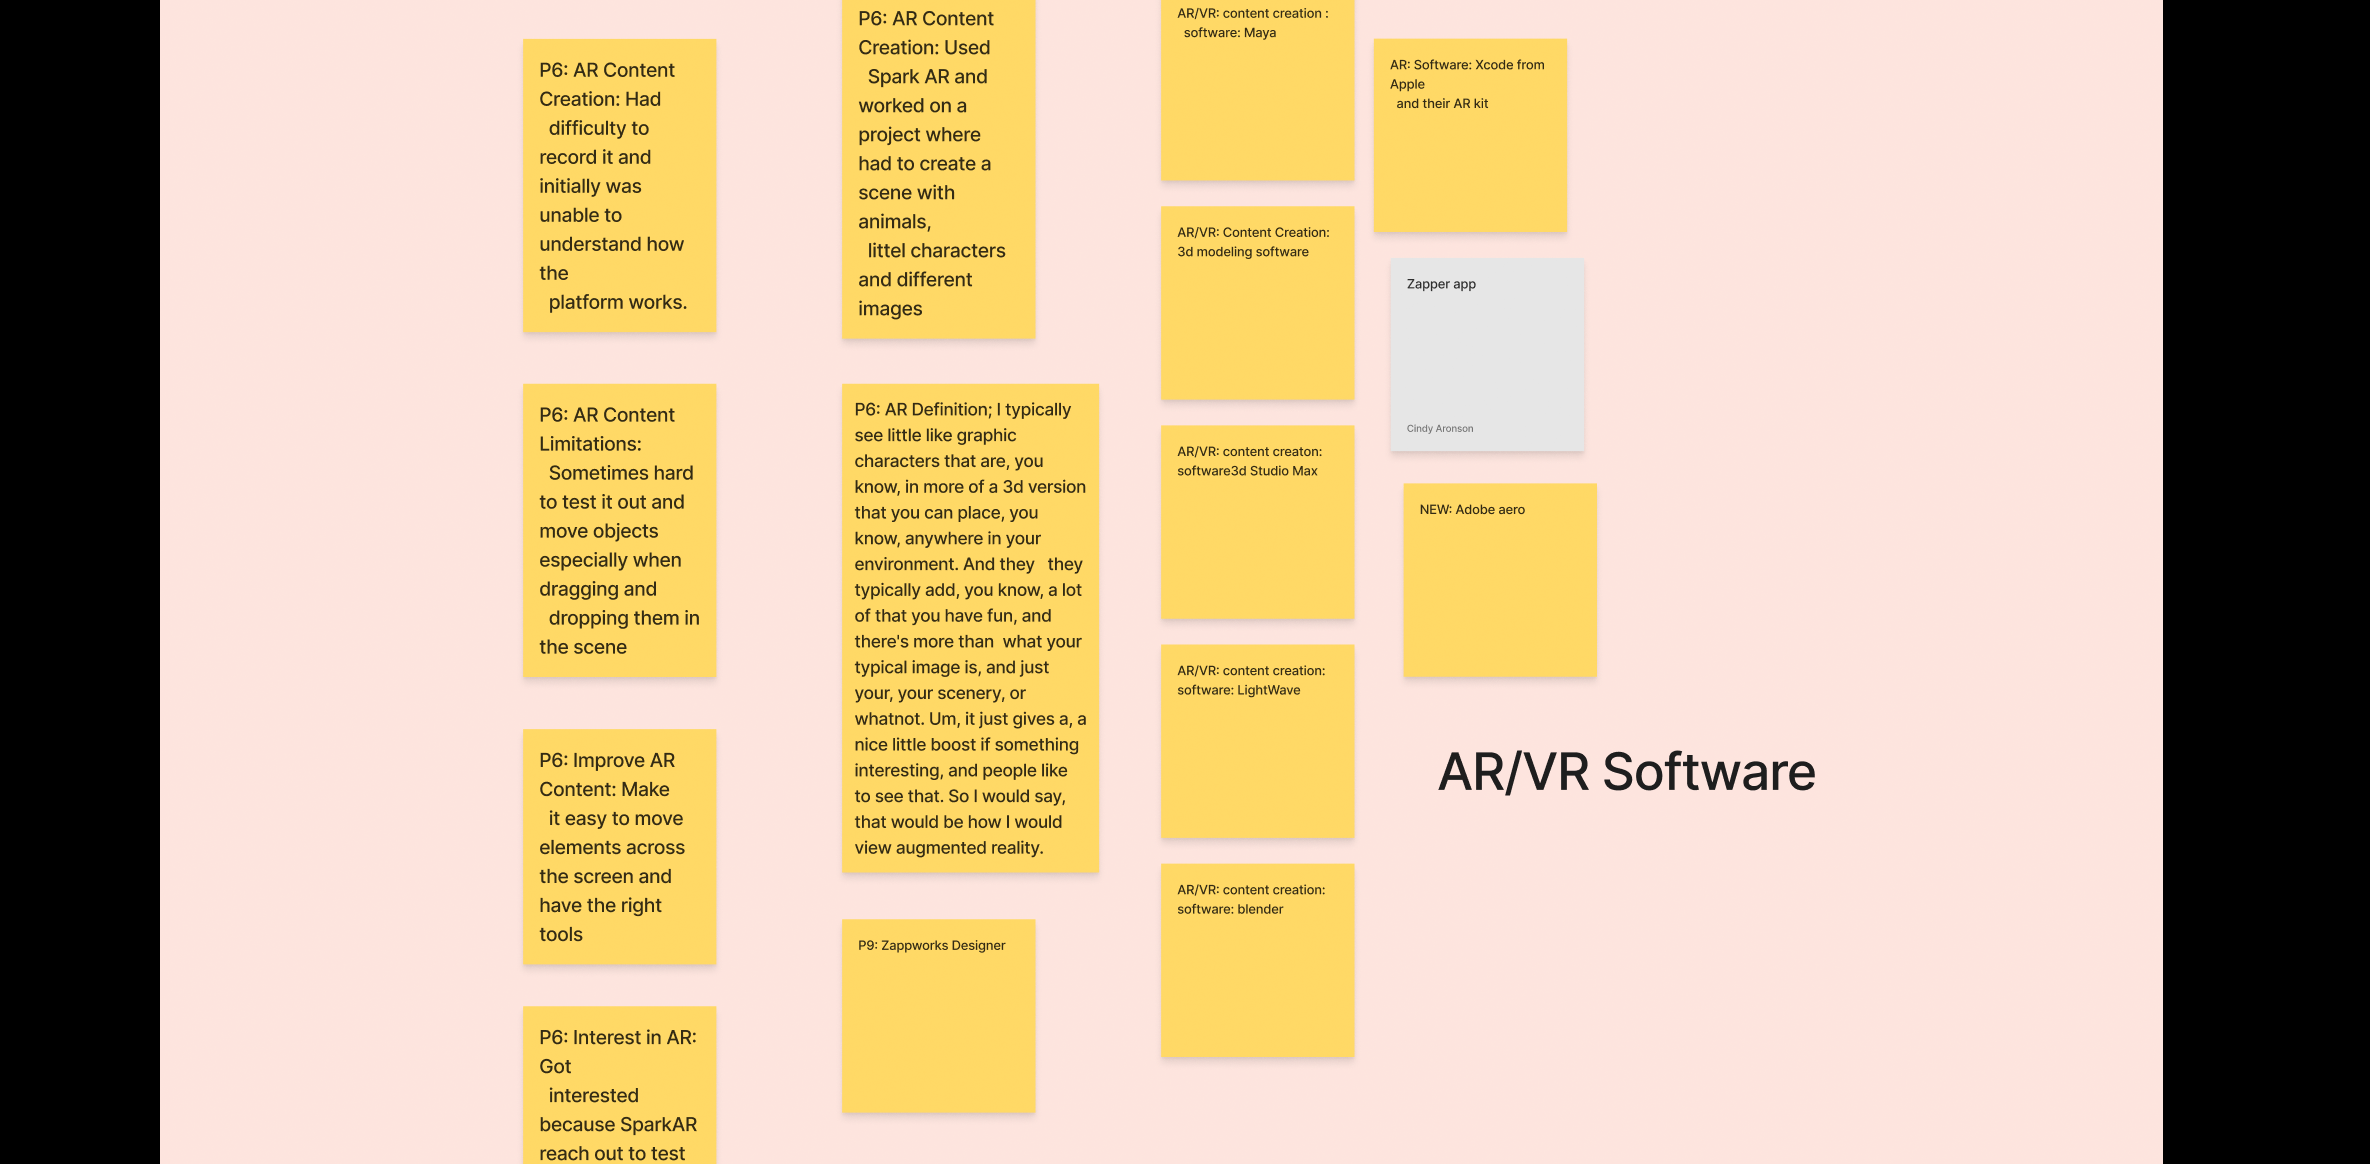 Expert Affinity Diagram of AR/VR Software categories, continued.